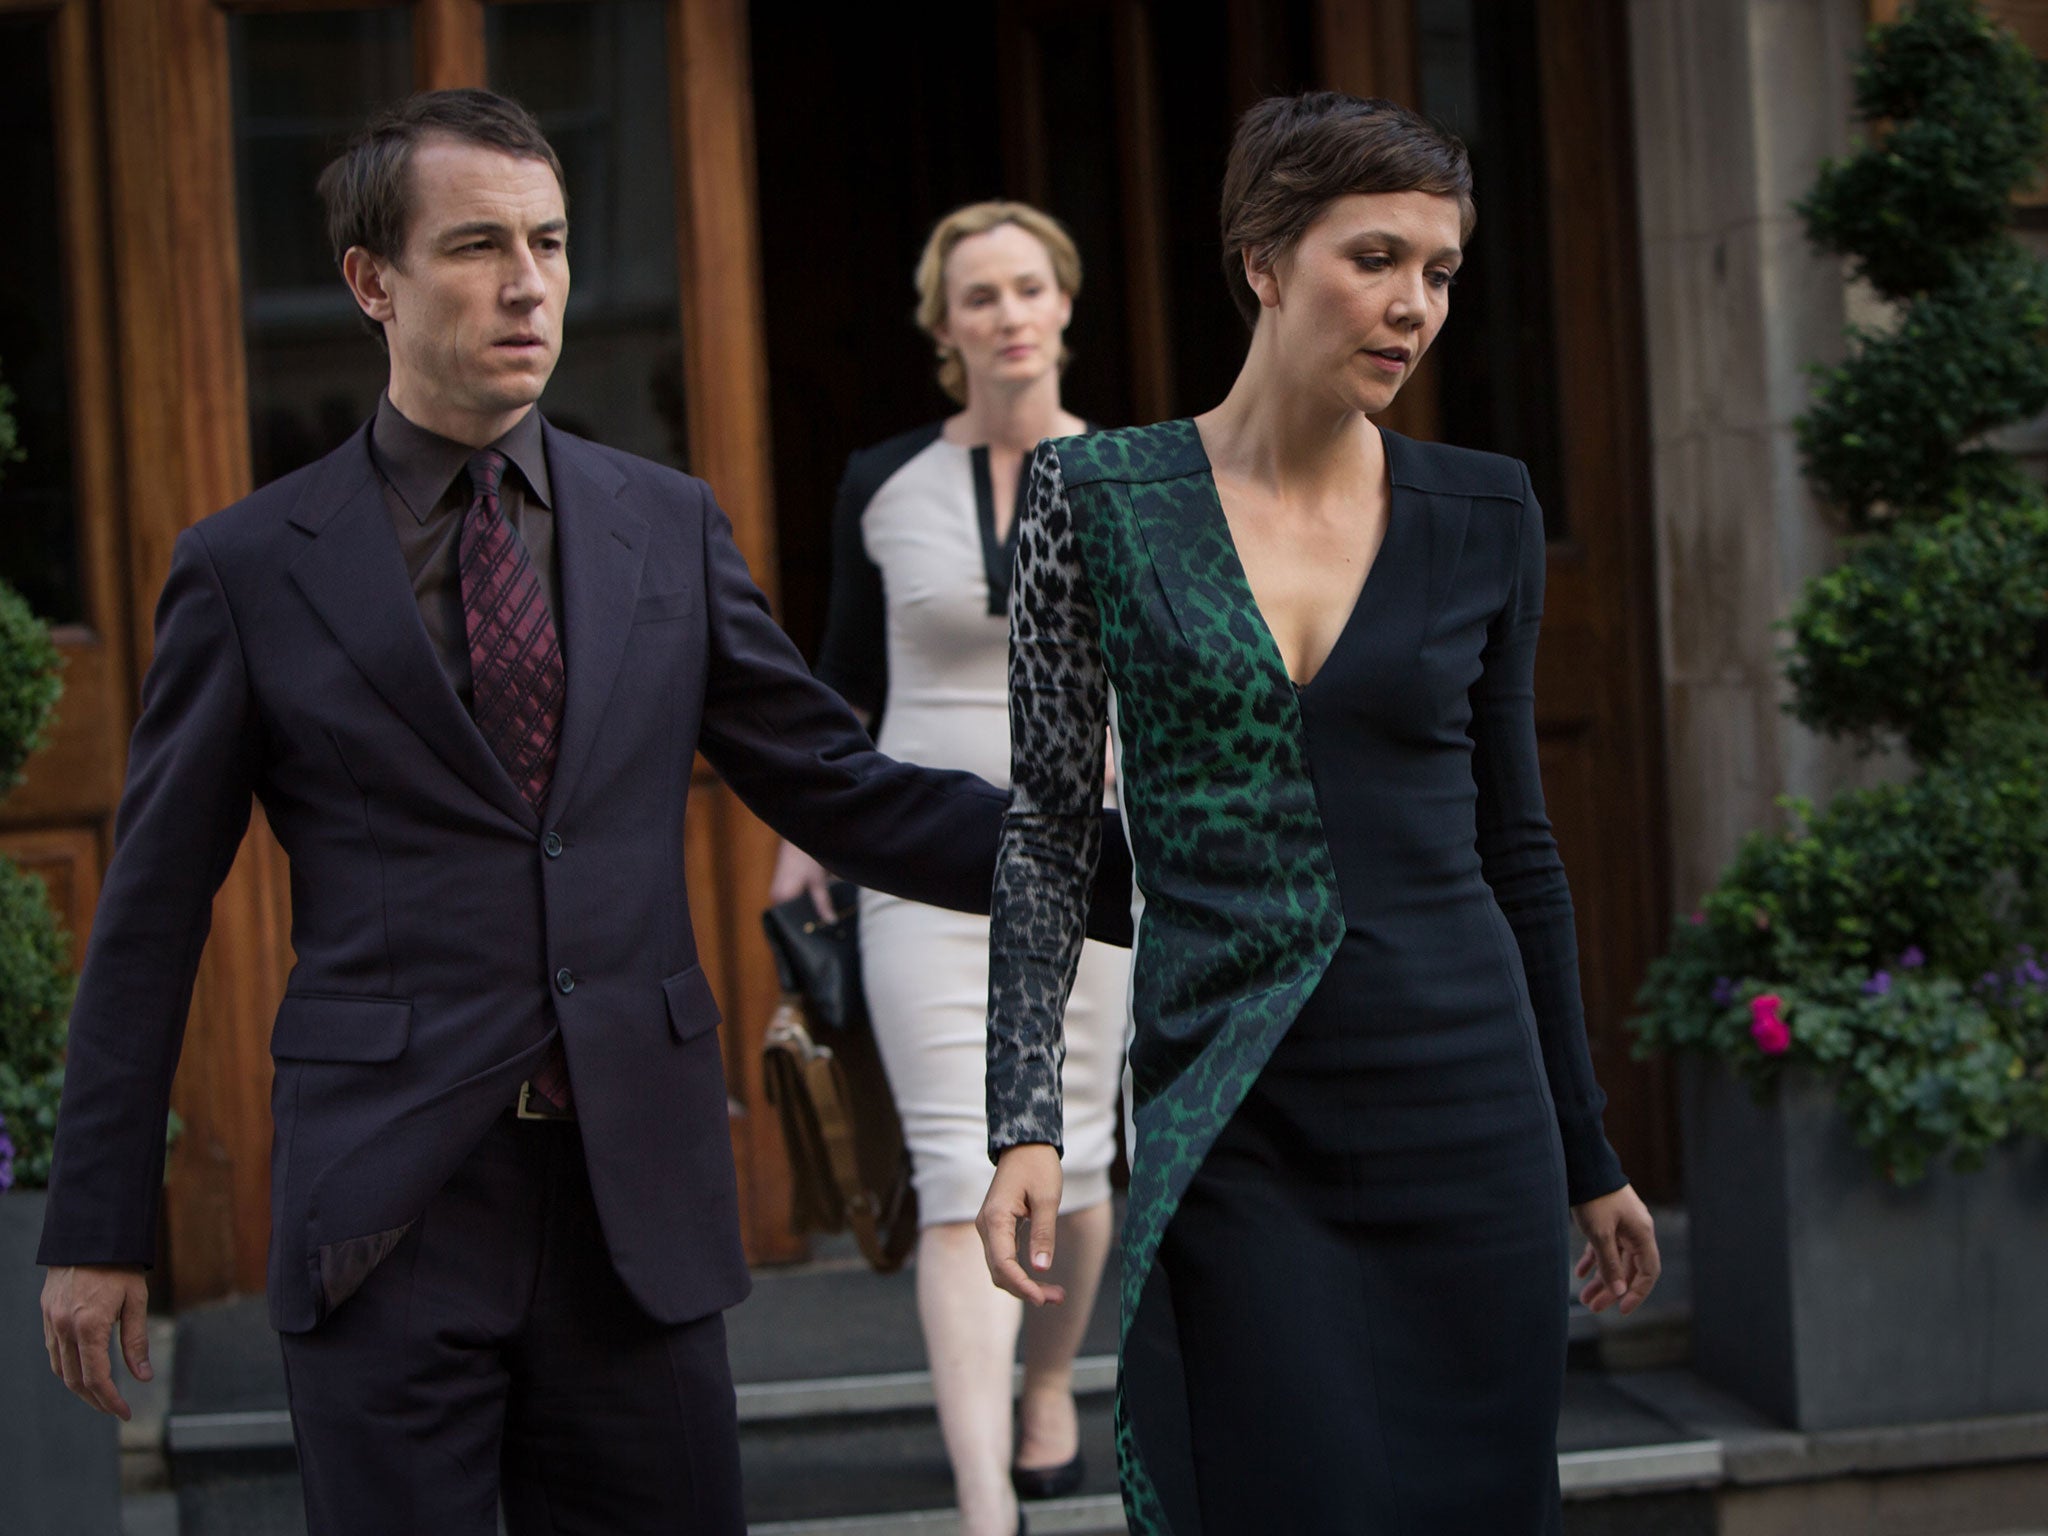 Helping hand: Tobias Menzies, Genevieve O’Reilly and Maggie Gyllenhaal in political drama ‘The Honourable Woman’